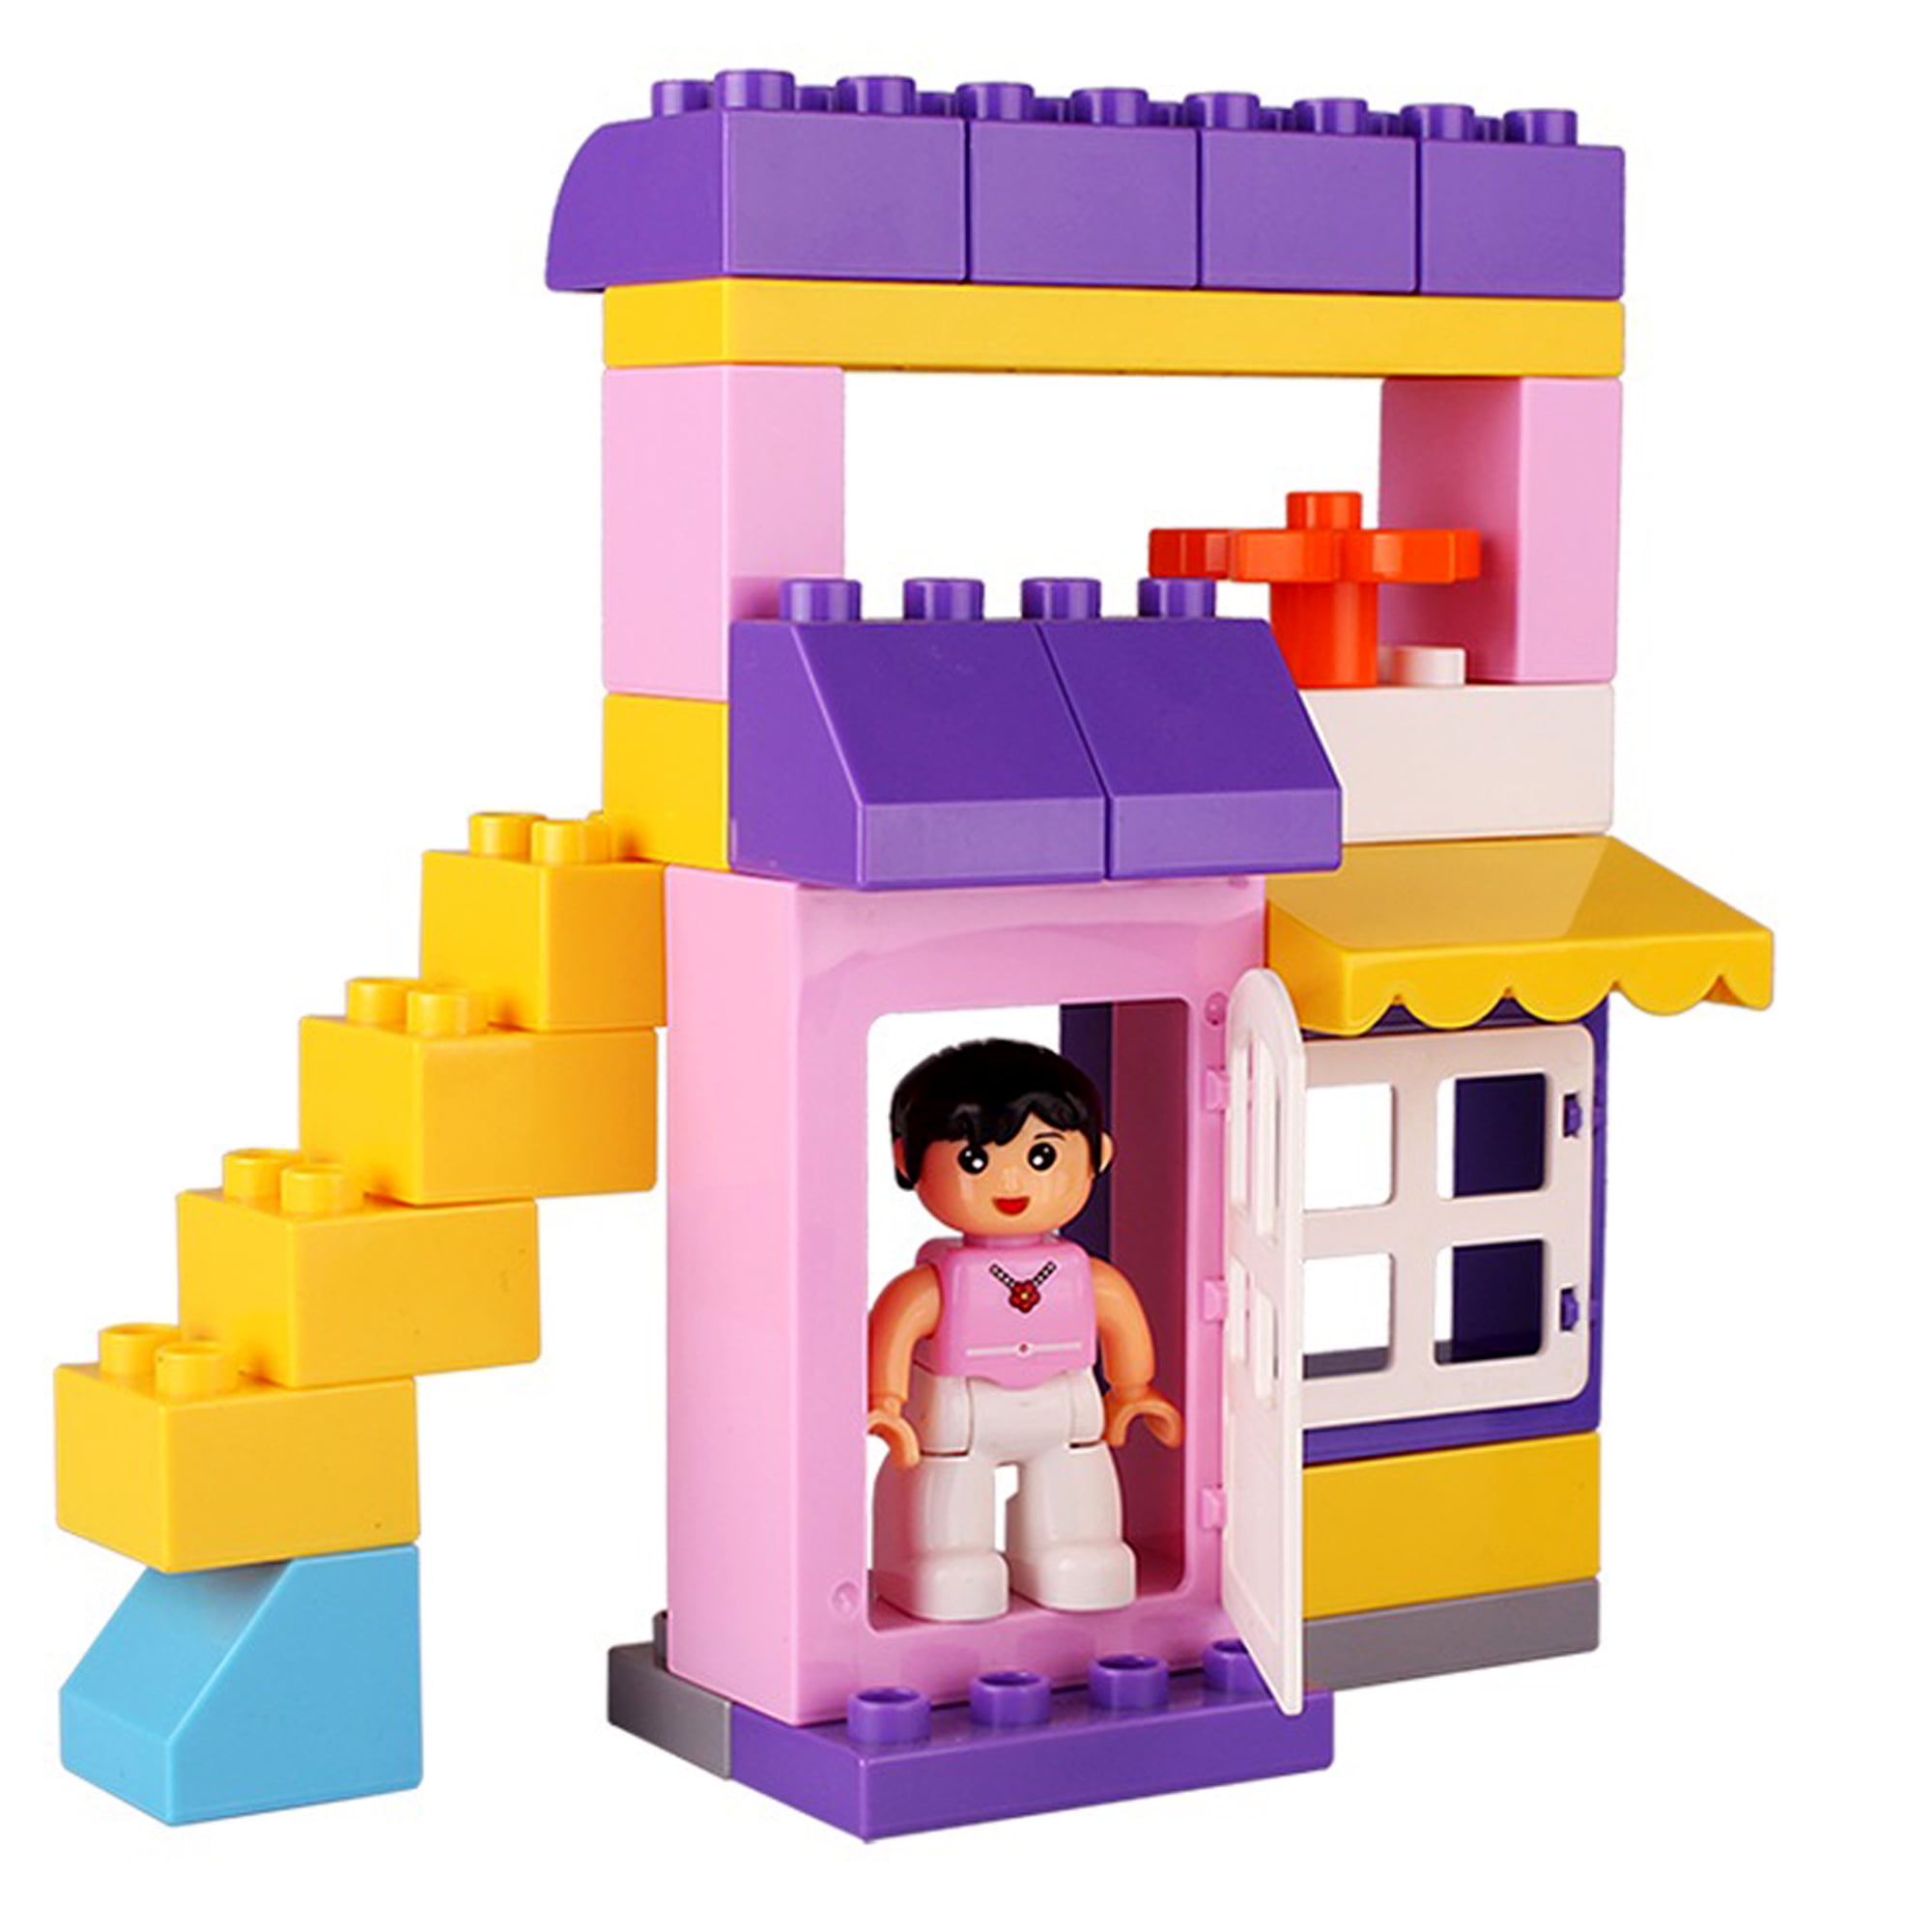 Fun and Creative! Educational 41 Pieces Ele Toys New from Interlocking Building Bricks Story Blocks Compatible with Major Brands Joey Gets Lost 